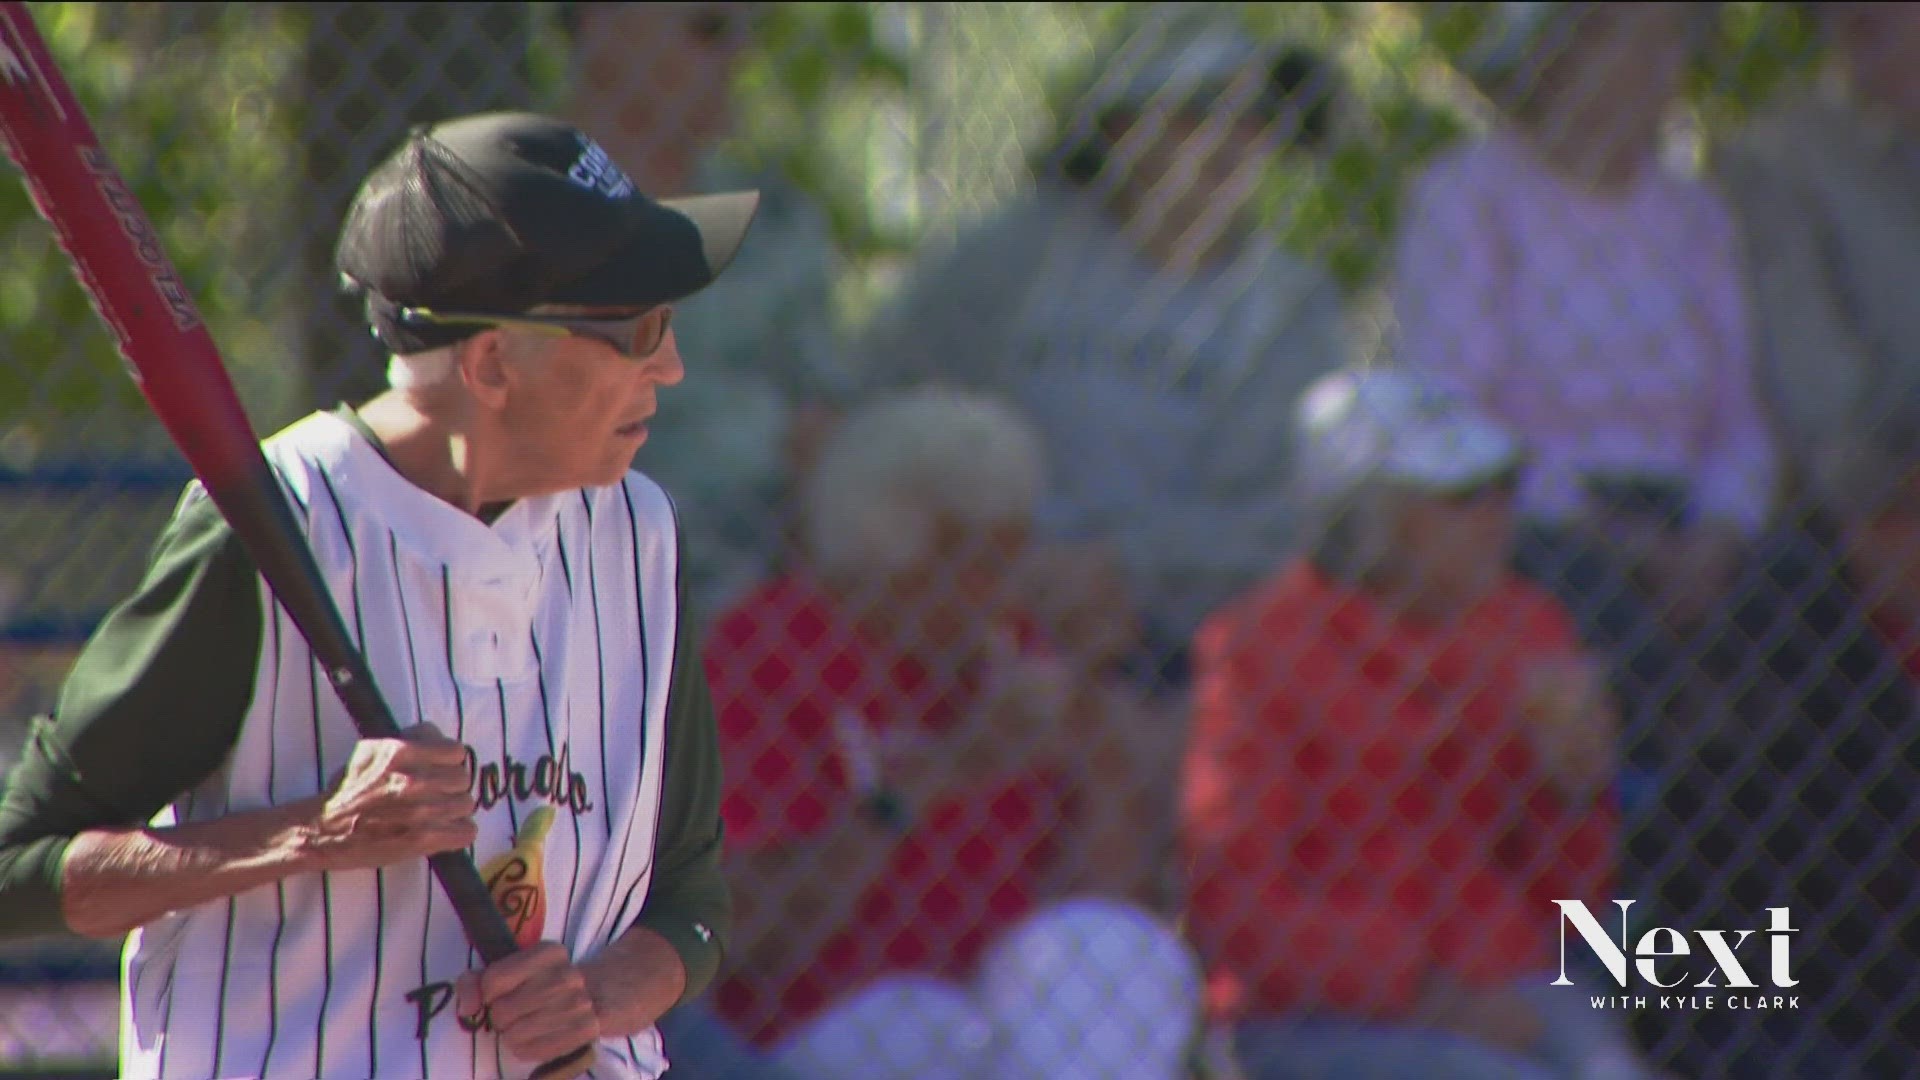 At the Peach Bowl, the Colorado Peaches women's softball team celebrated a beloved player inducted into the Huntsman’s Senior Games Hall of Fame, Maggie McClosky.